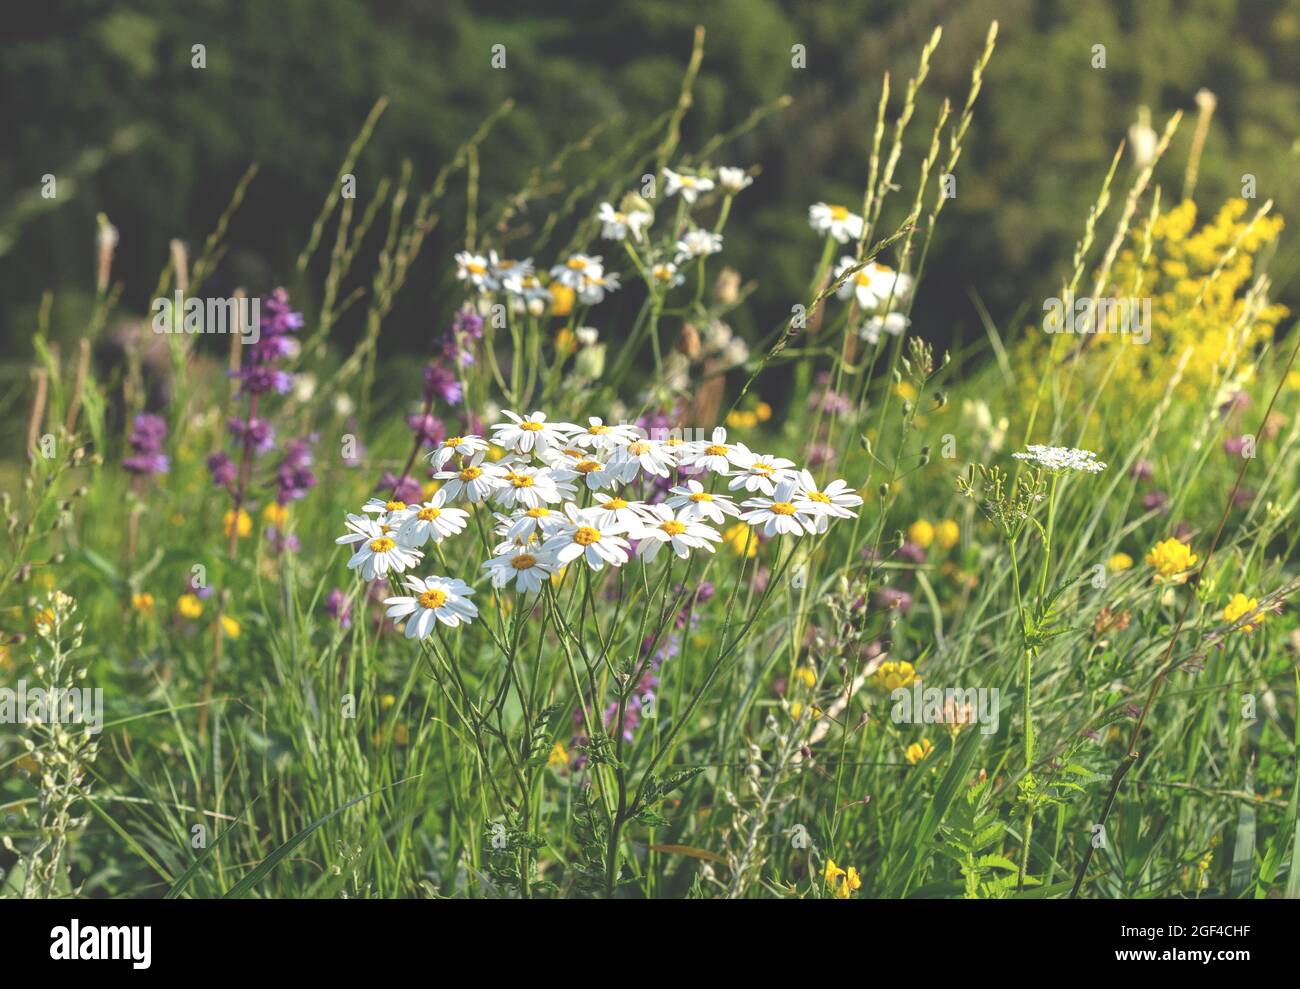 A meadow with beautiful wildflowers and mountain grasses. Rural landscape on a warm summer day. Daisies close-up Stock Photo